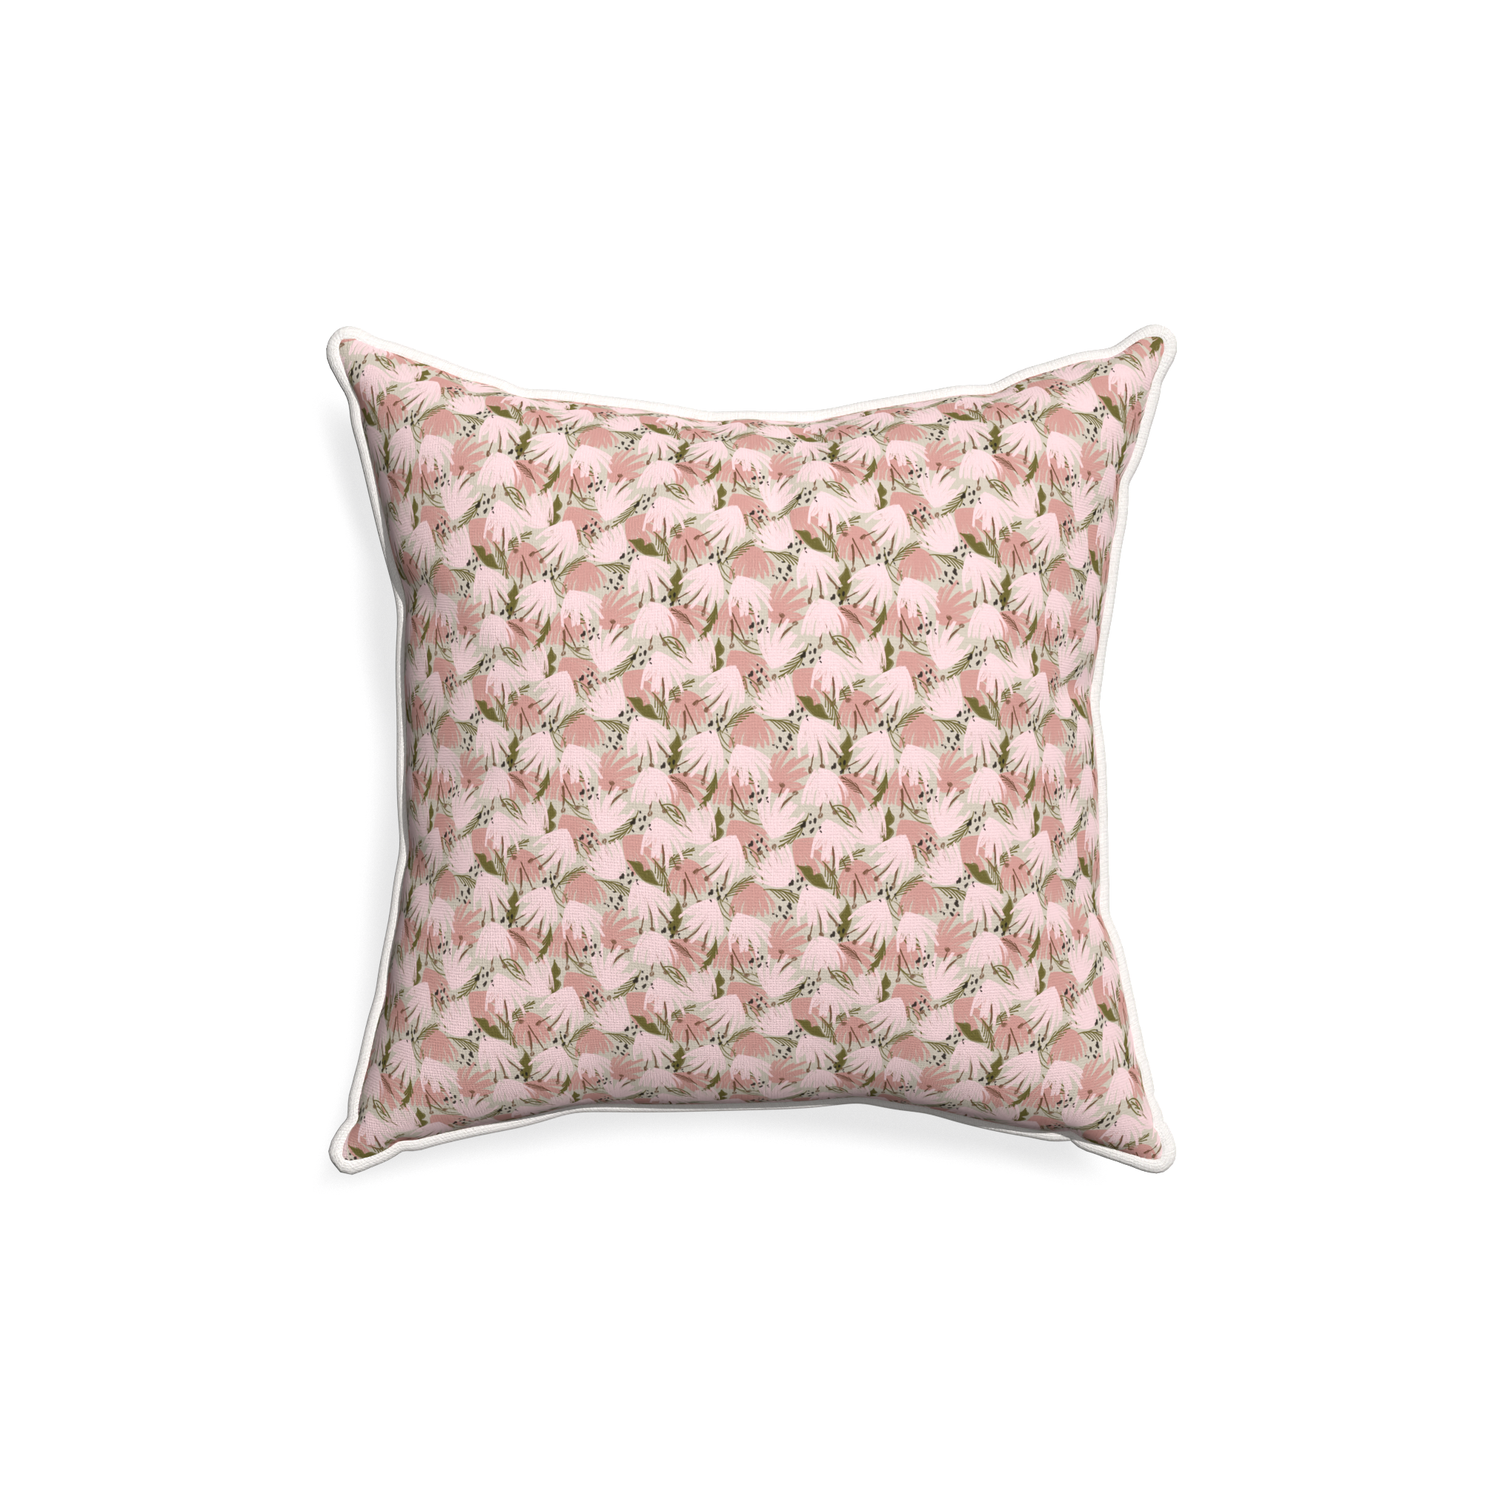 18-square eden pink custom pink floralpillow with snow piping on white background